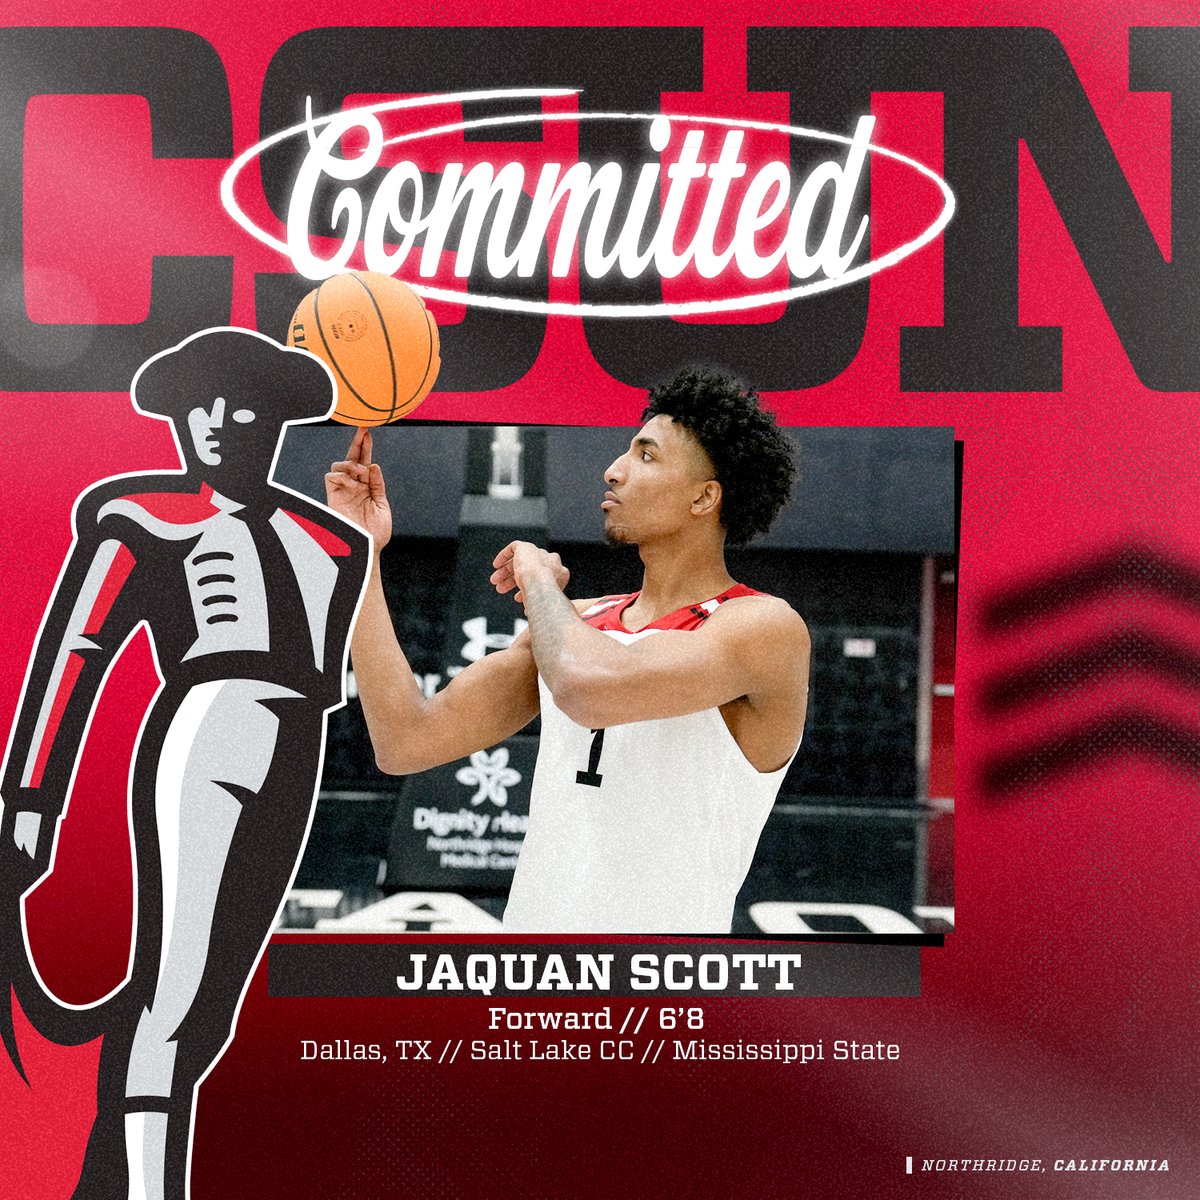 ♦️ Averaged 16.8 points and 10.0 rebounds at Salt Lake CC in 2022-23. ♦️ Played for NCAA Tournament team Mississippi State in 2023-24. Big things ahead for Jaquan Scott at CSUN. #GoMatadors